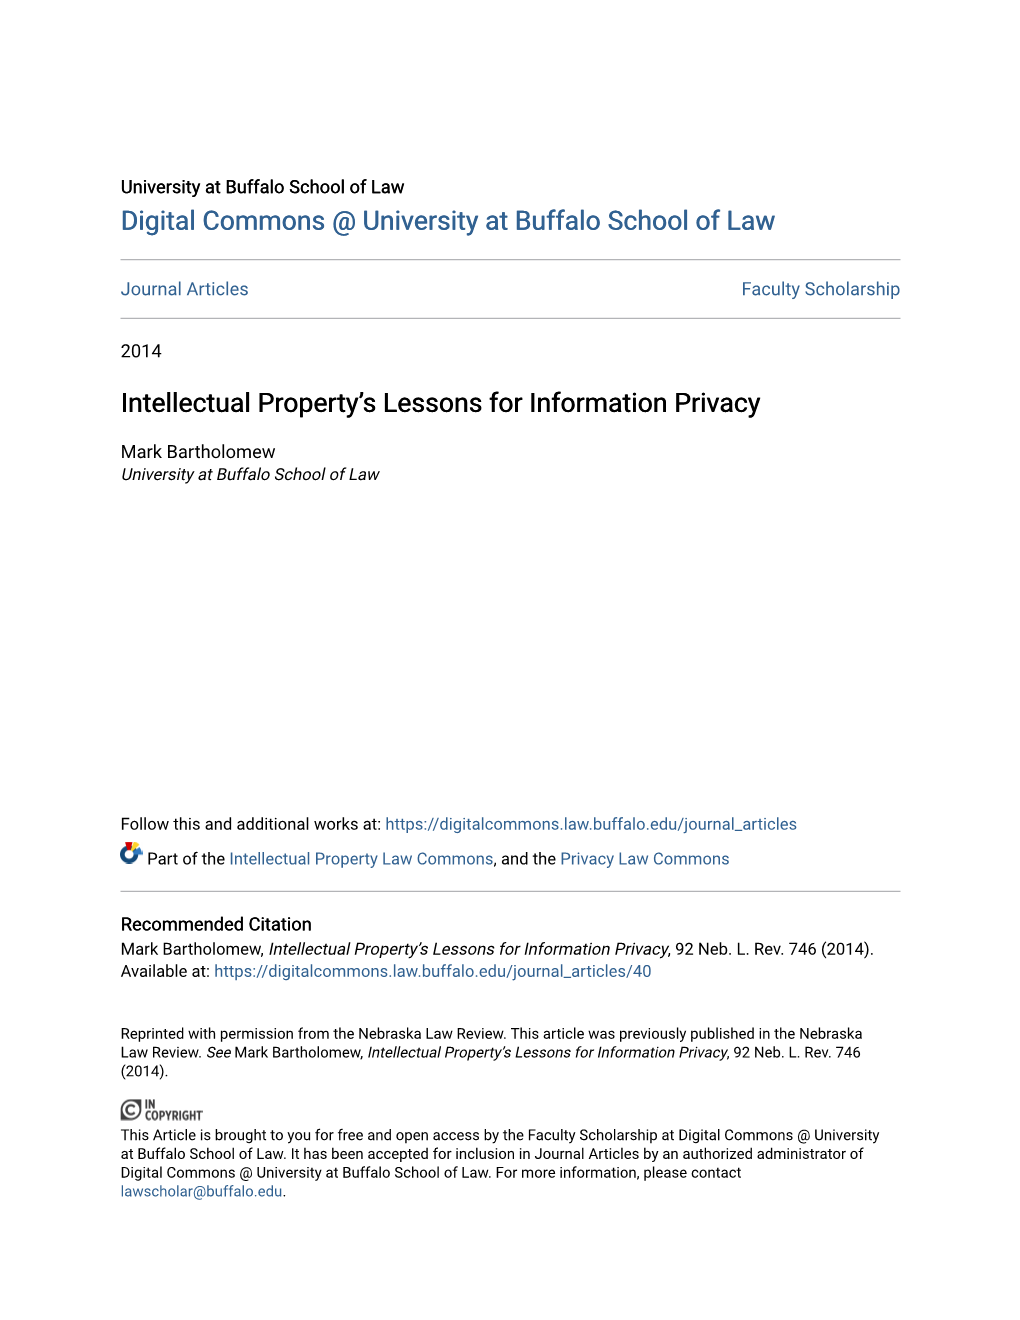 Intellectual Property's Lessons for Information Privacy